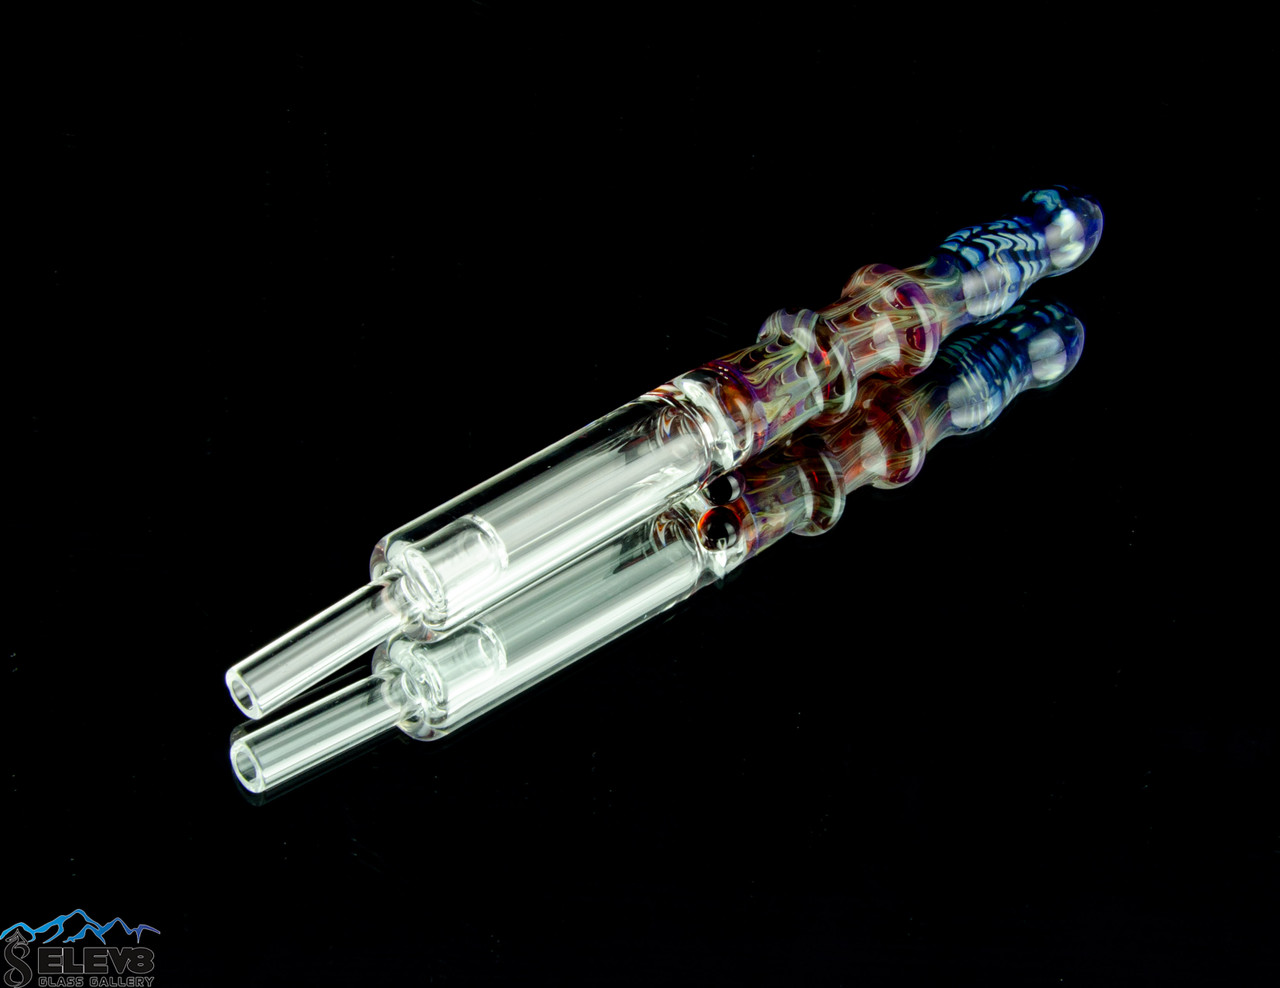 VERB ESB Electronic Straw Bubbler Dab and Wax Vaporizer